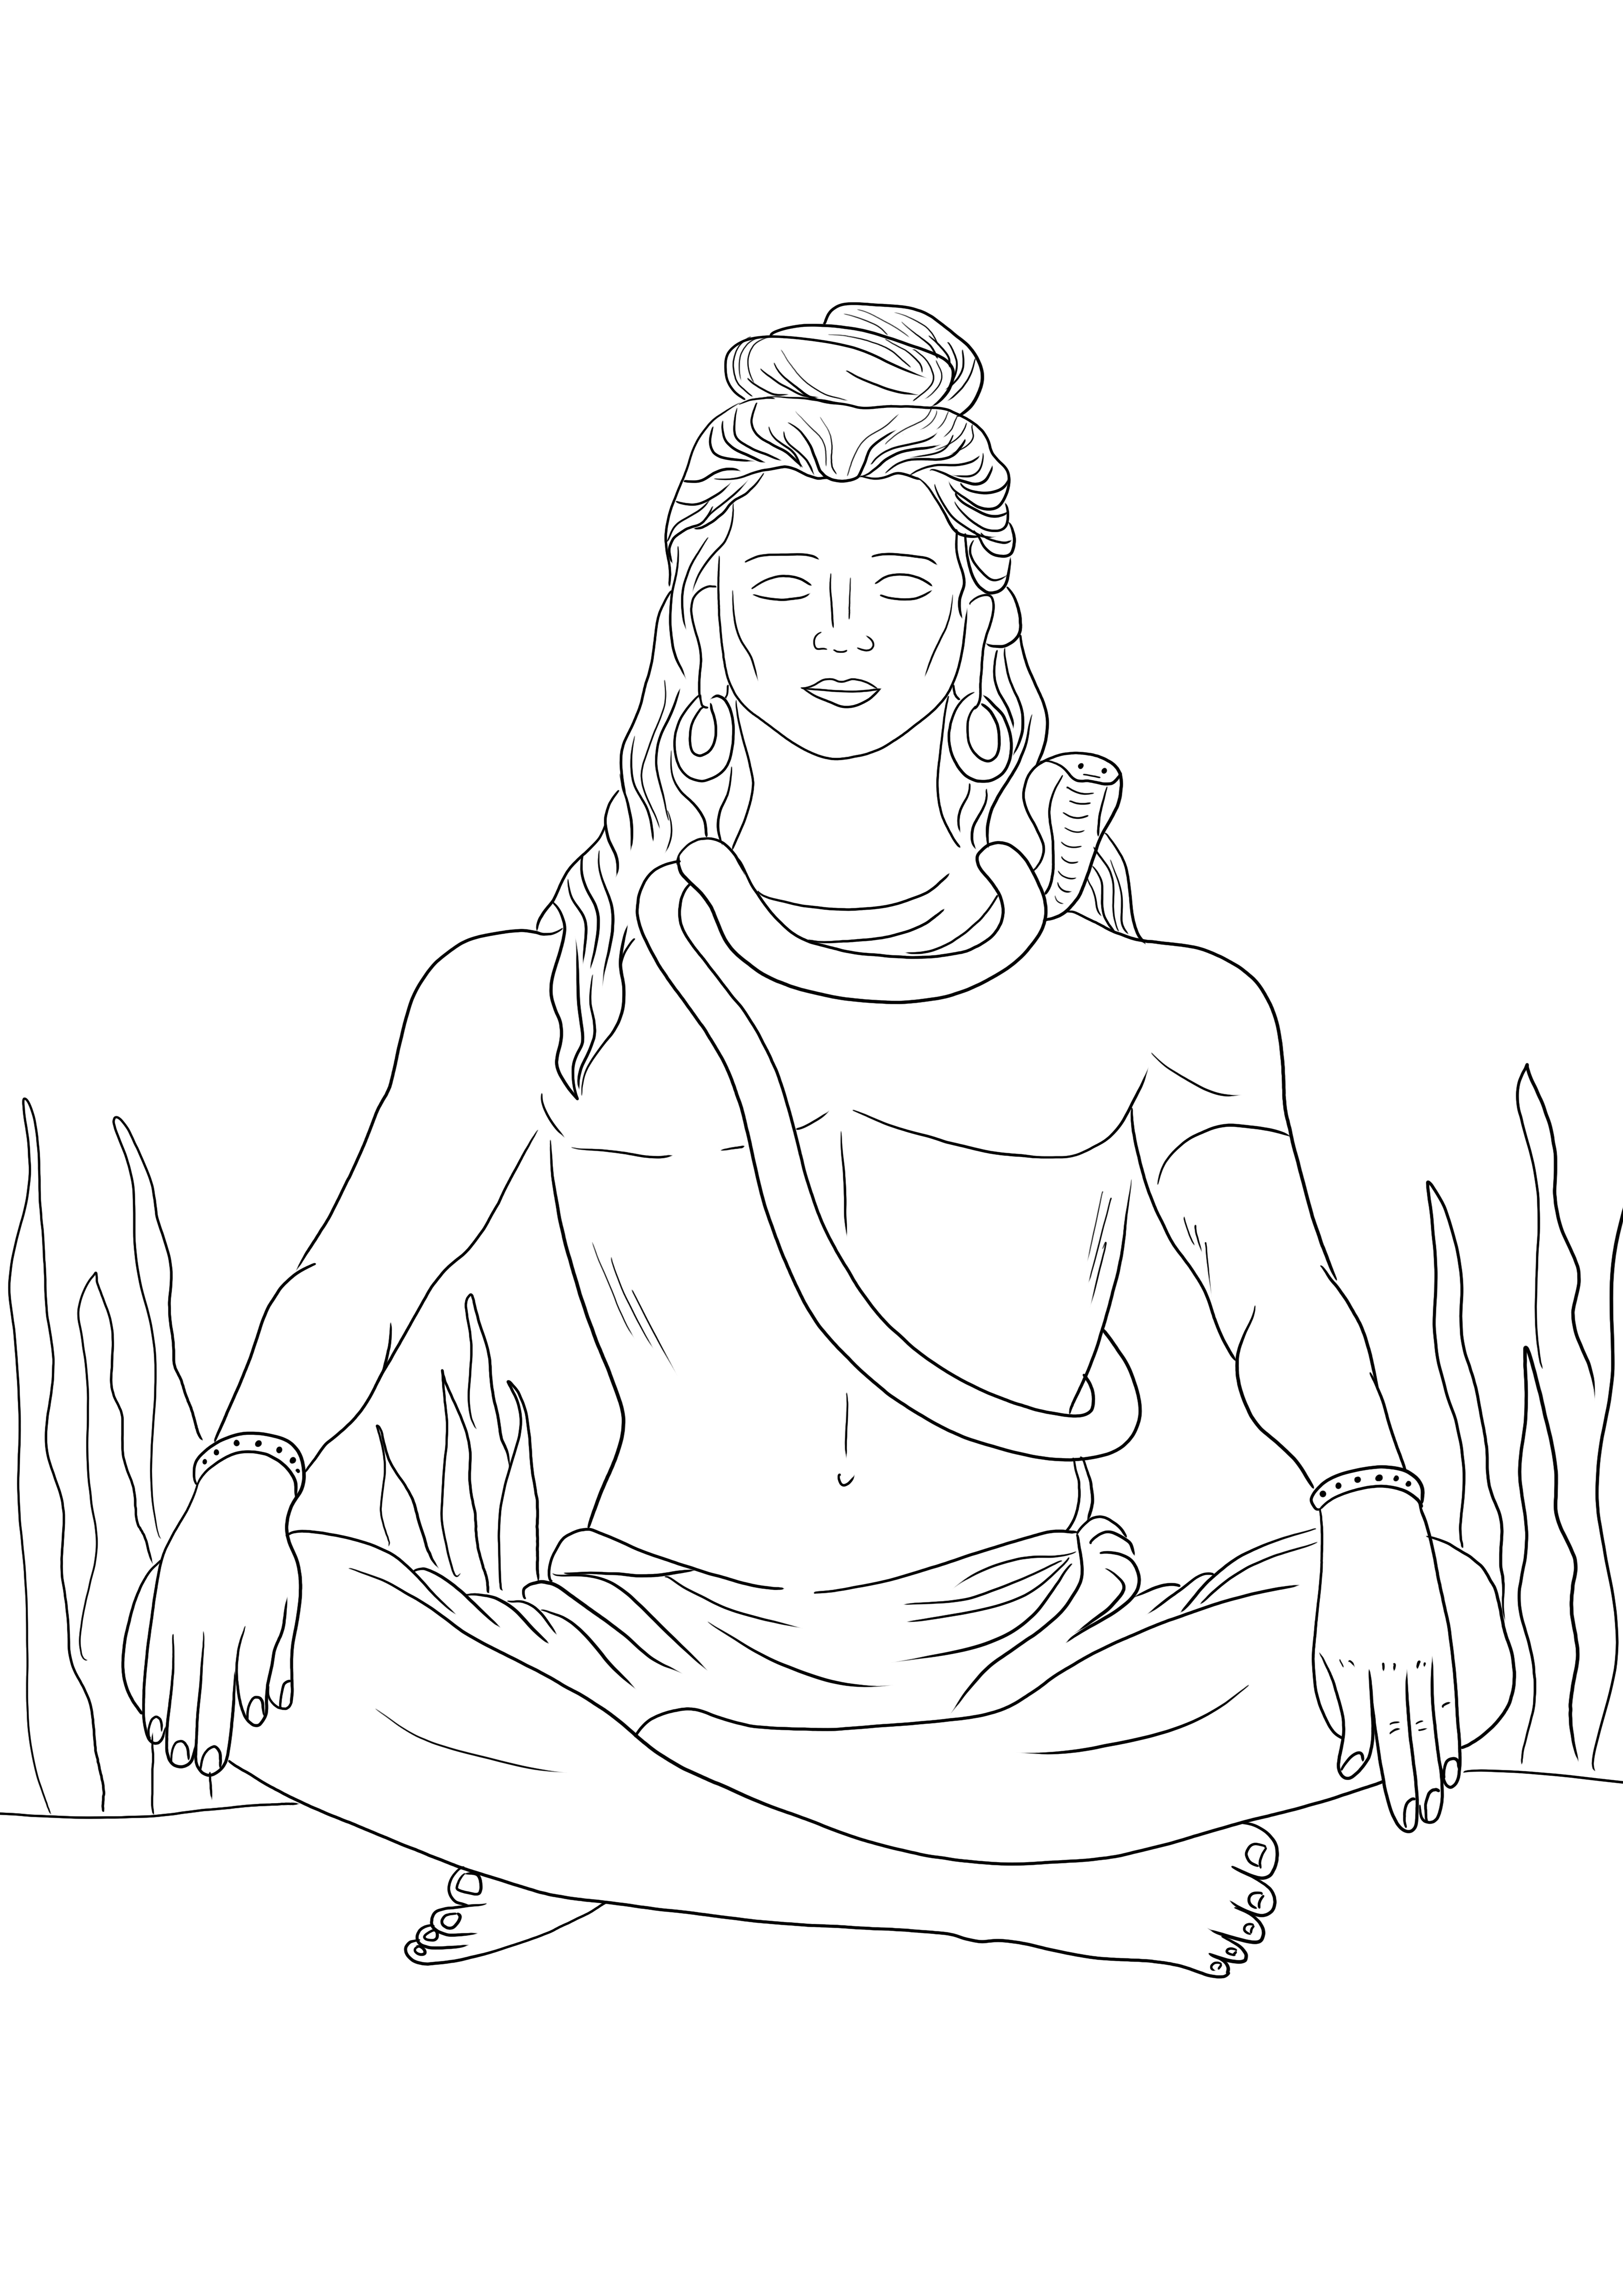 Lord Shiva is free printable ready to color and free to be printed